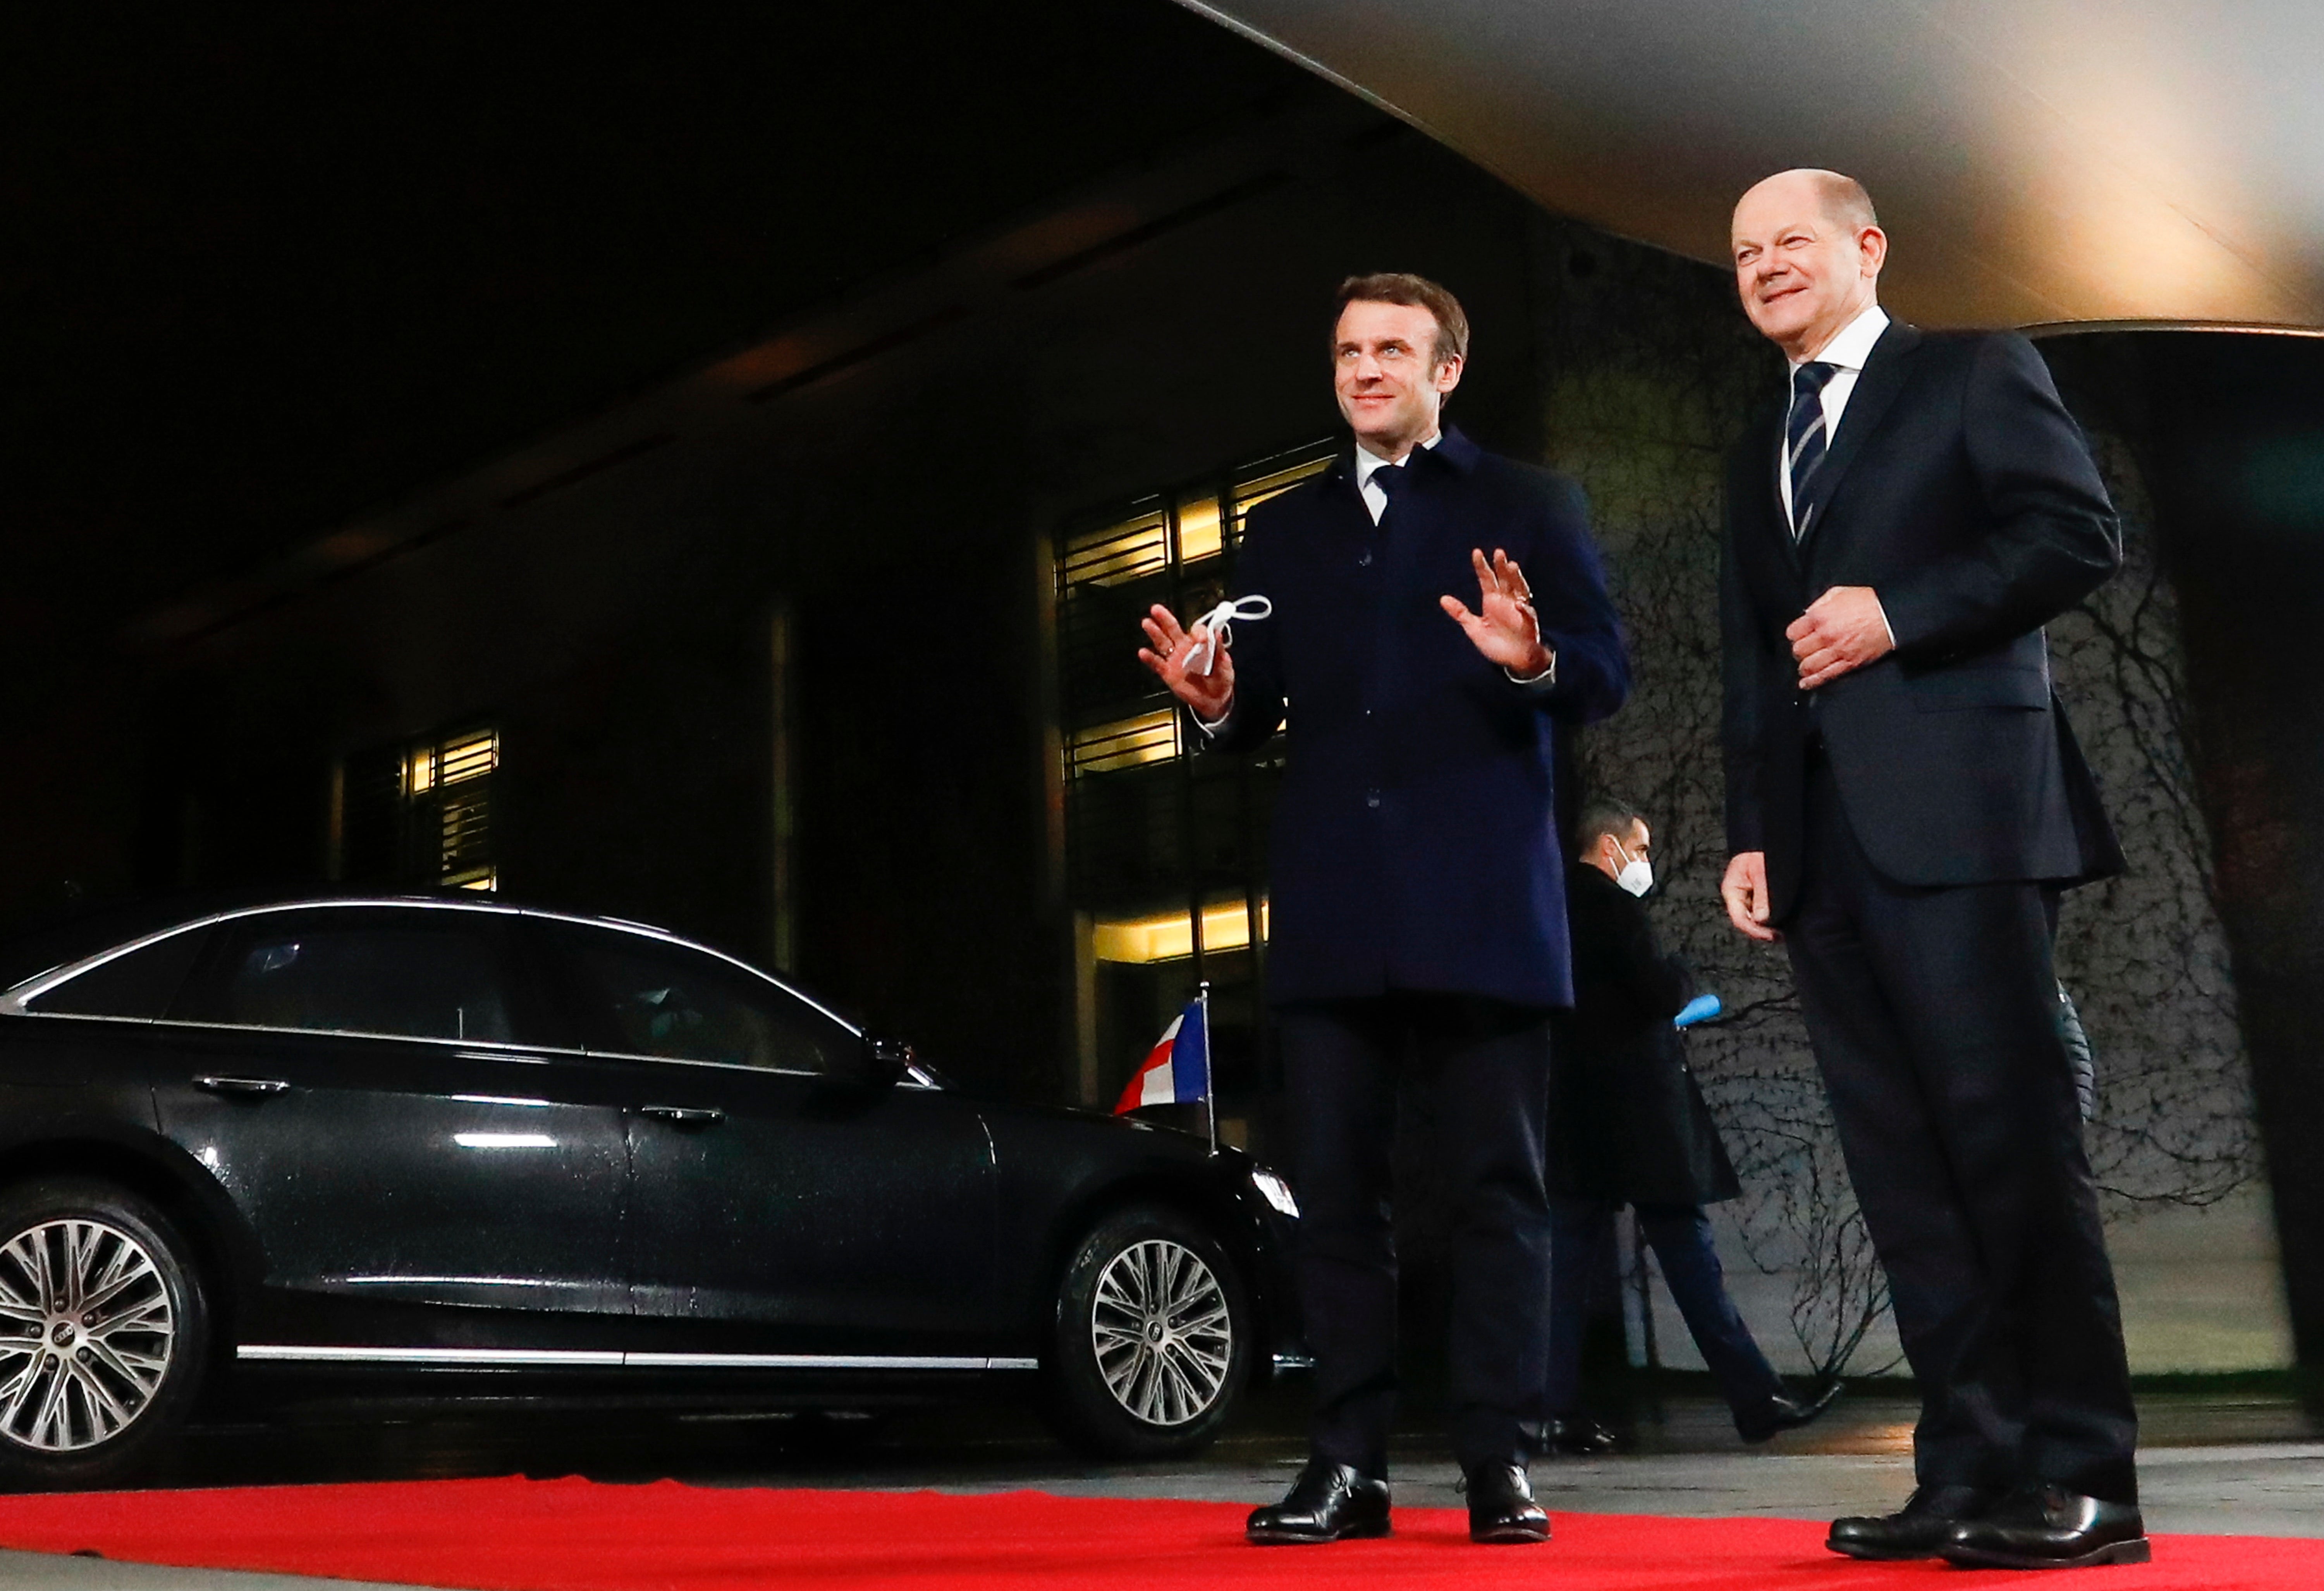 German chancellor Olaf Scholz (R) welcomes French president Emmanuel Macron (L) ahead of their meeting at the Federal Chancellery in Berlin, Germany